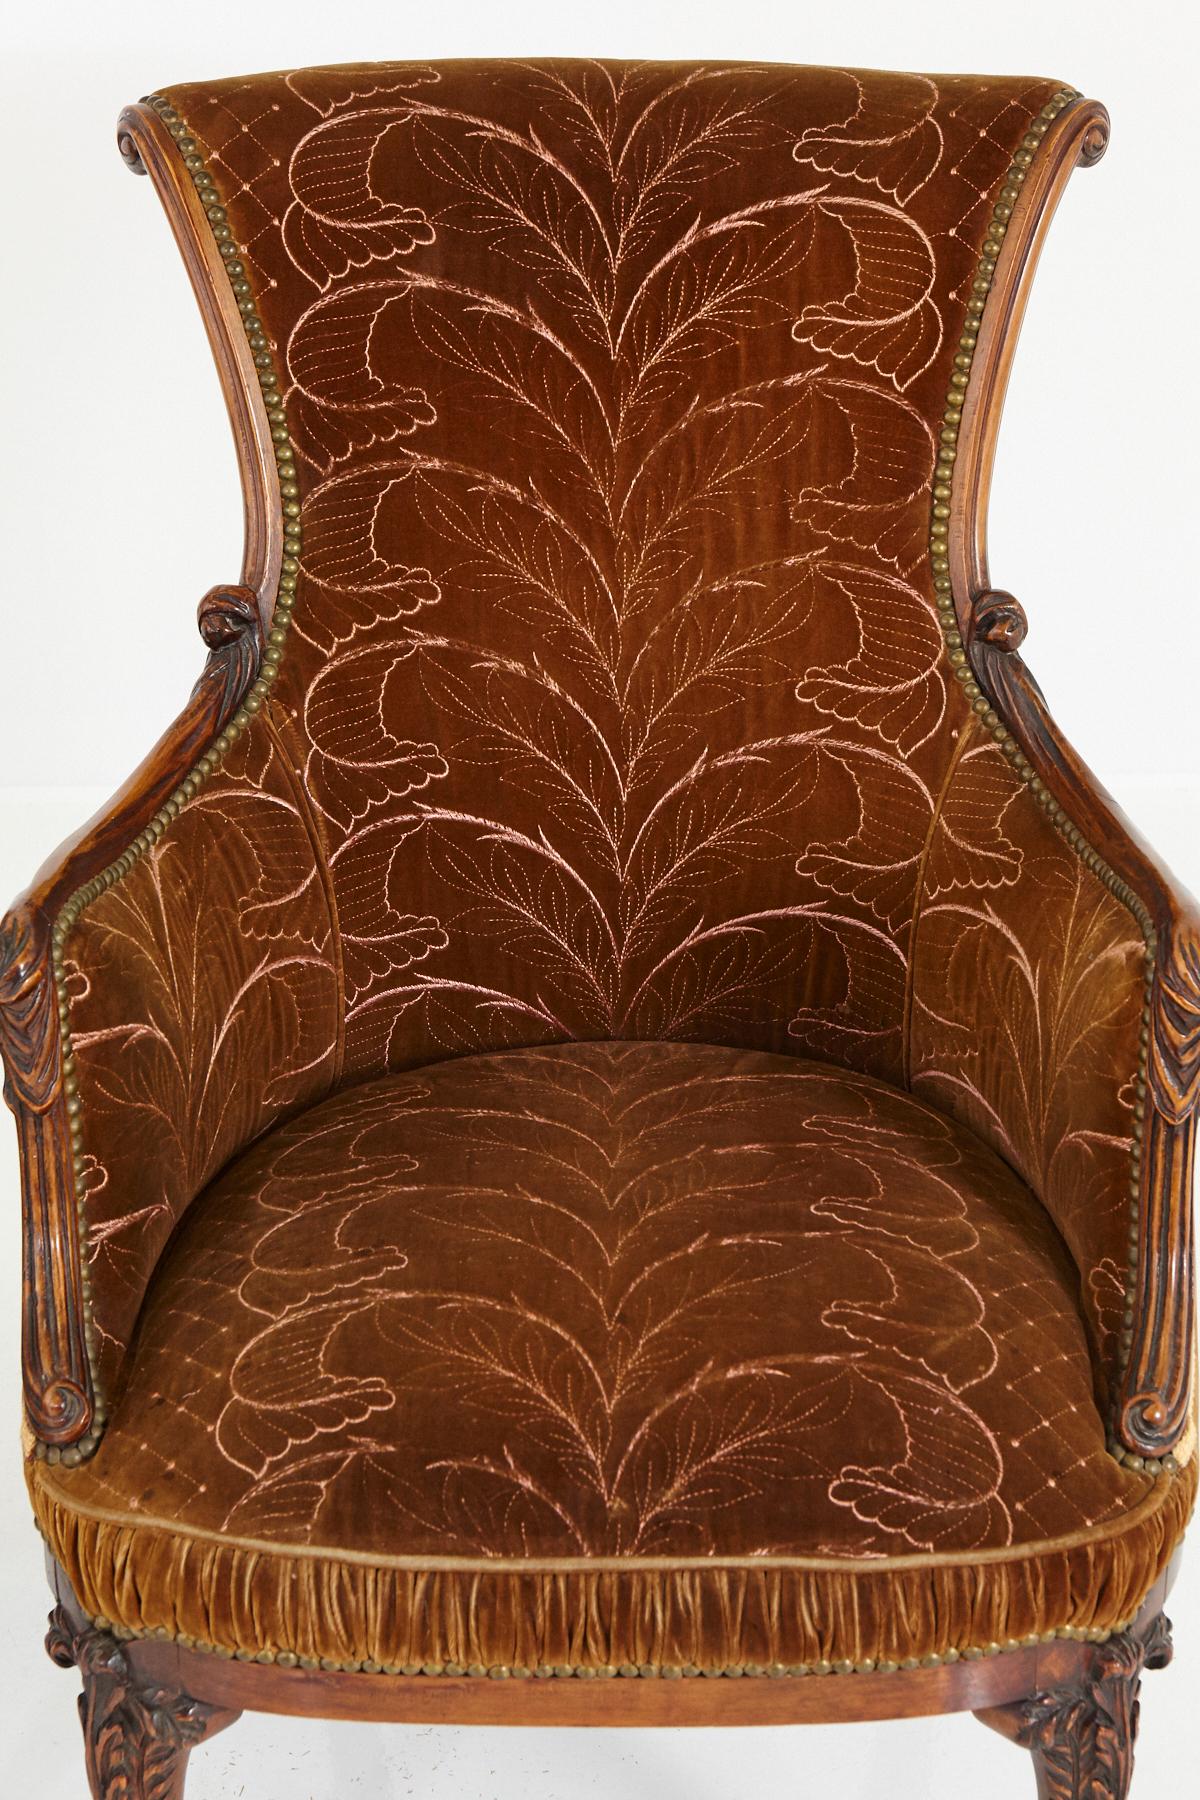 Pair of French Art Nouveau Armchairs, Two-Tone Cognac Colored Embroidered Velvet 4